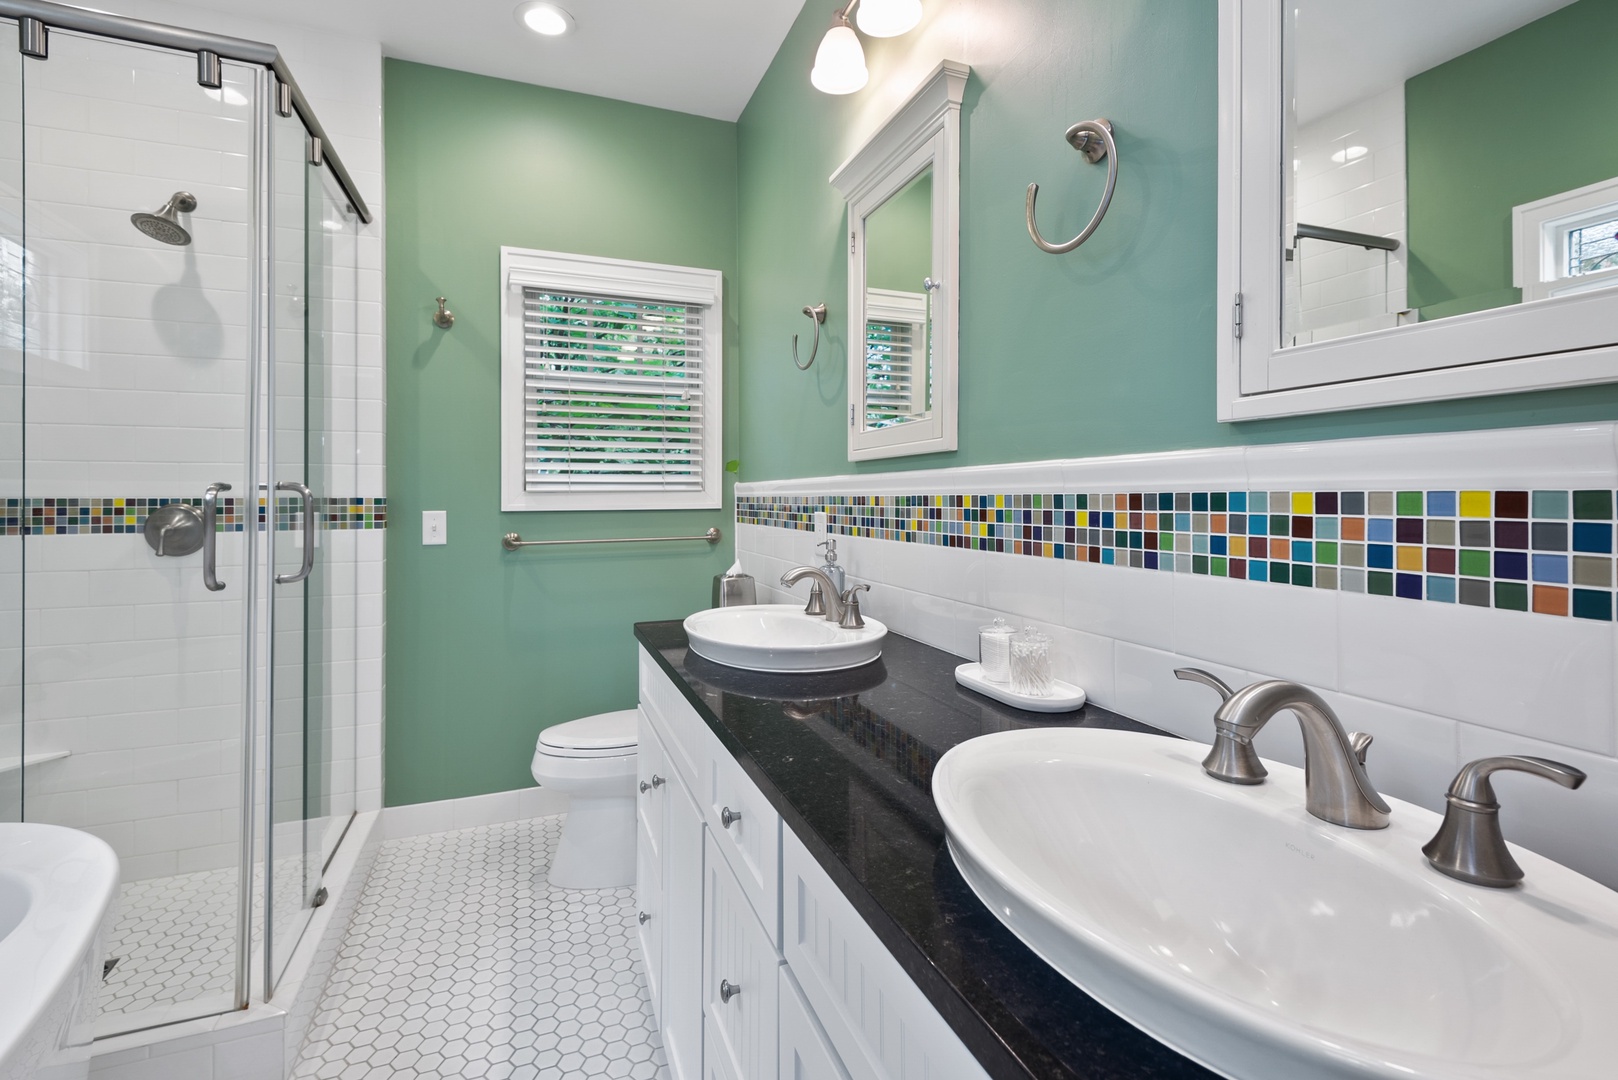 The main en-suite bath is fully remodeled with heated floors, dual-sink vanity, statement tub, & glass-and-tile shower.